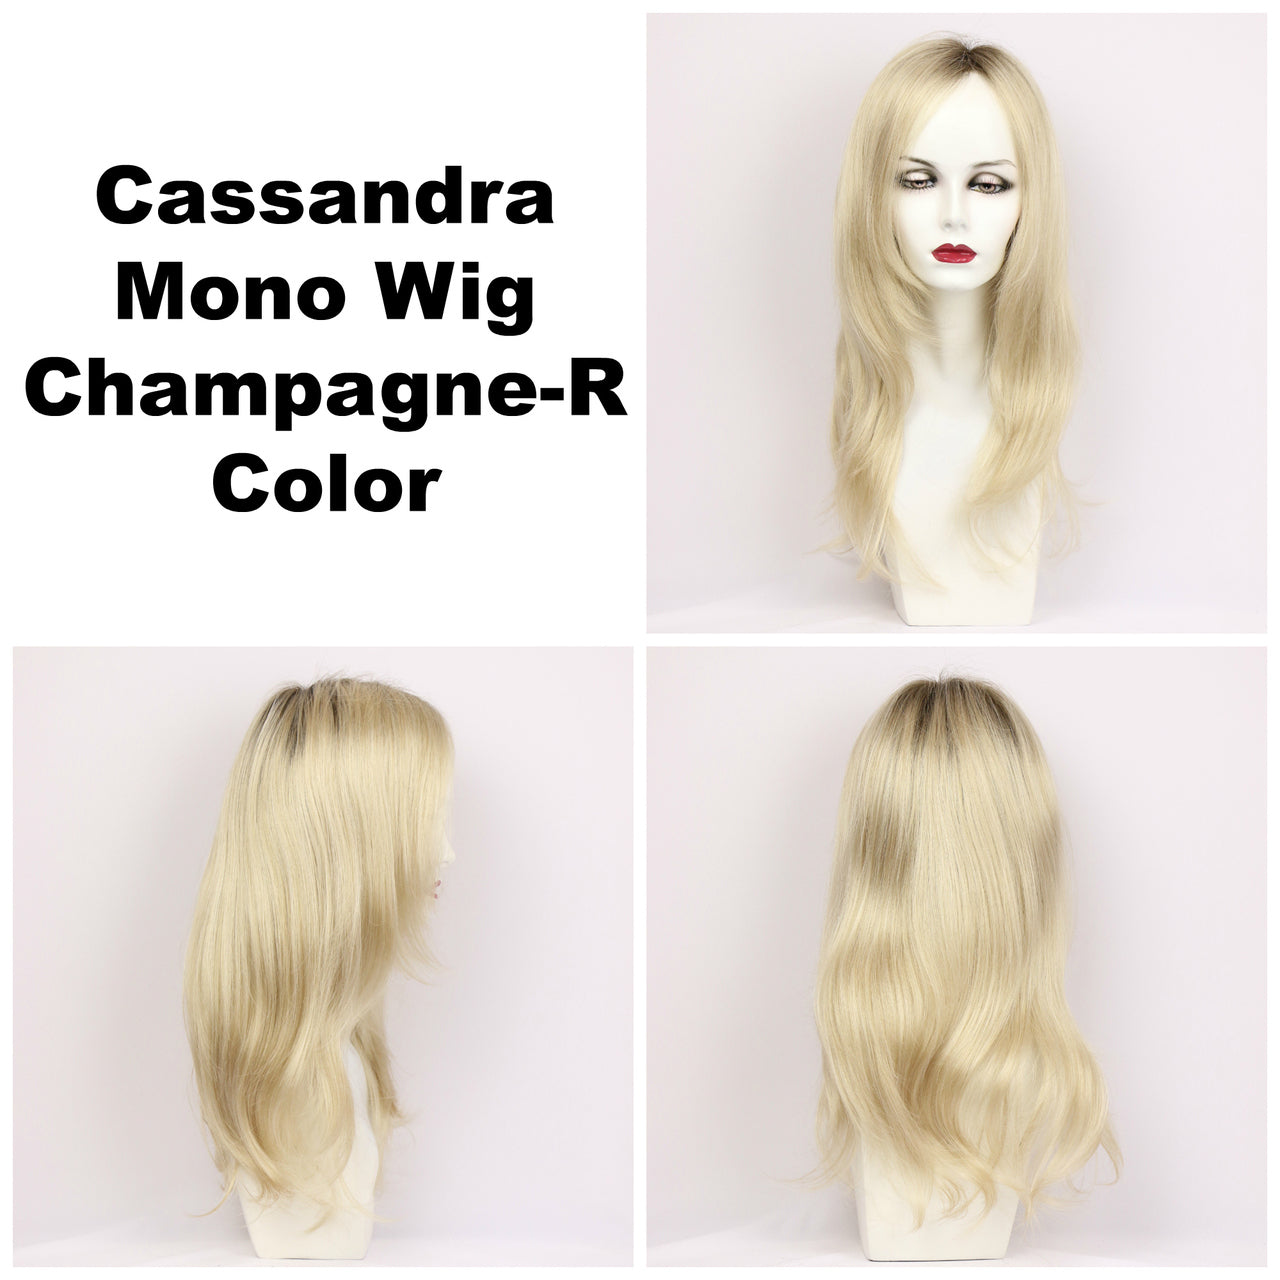 Champagne-R / Cassandra Monofilament w/ Roots / Long Wig